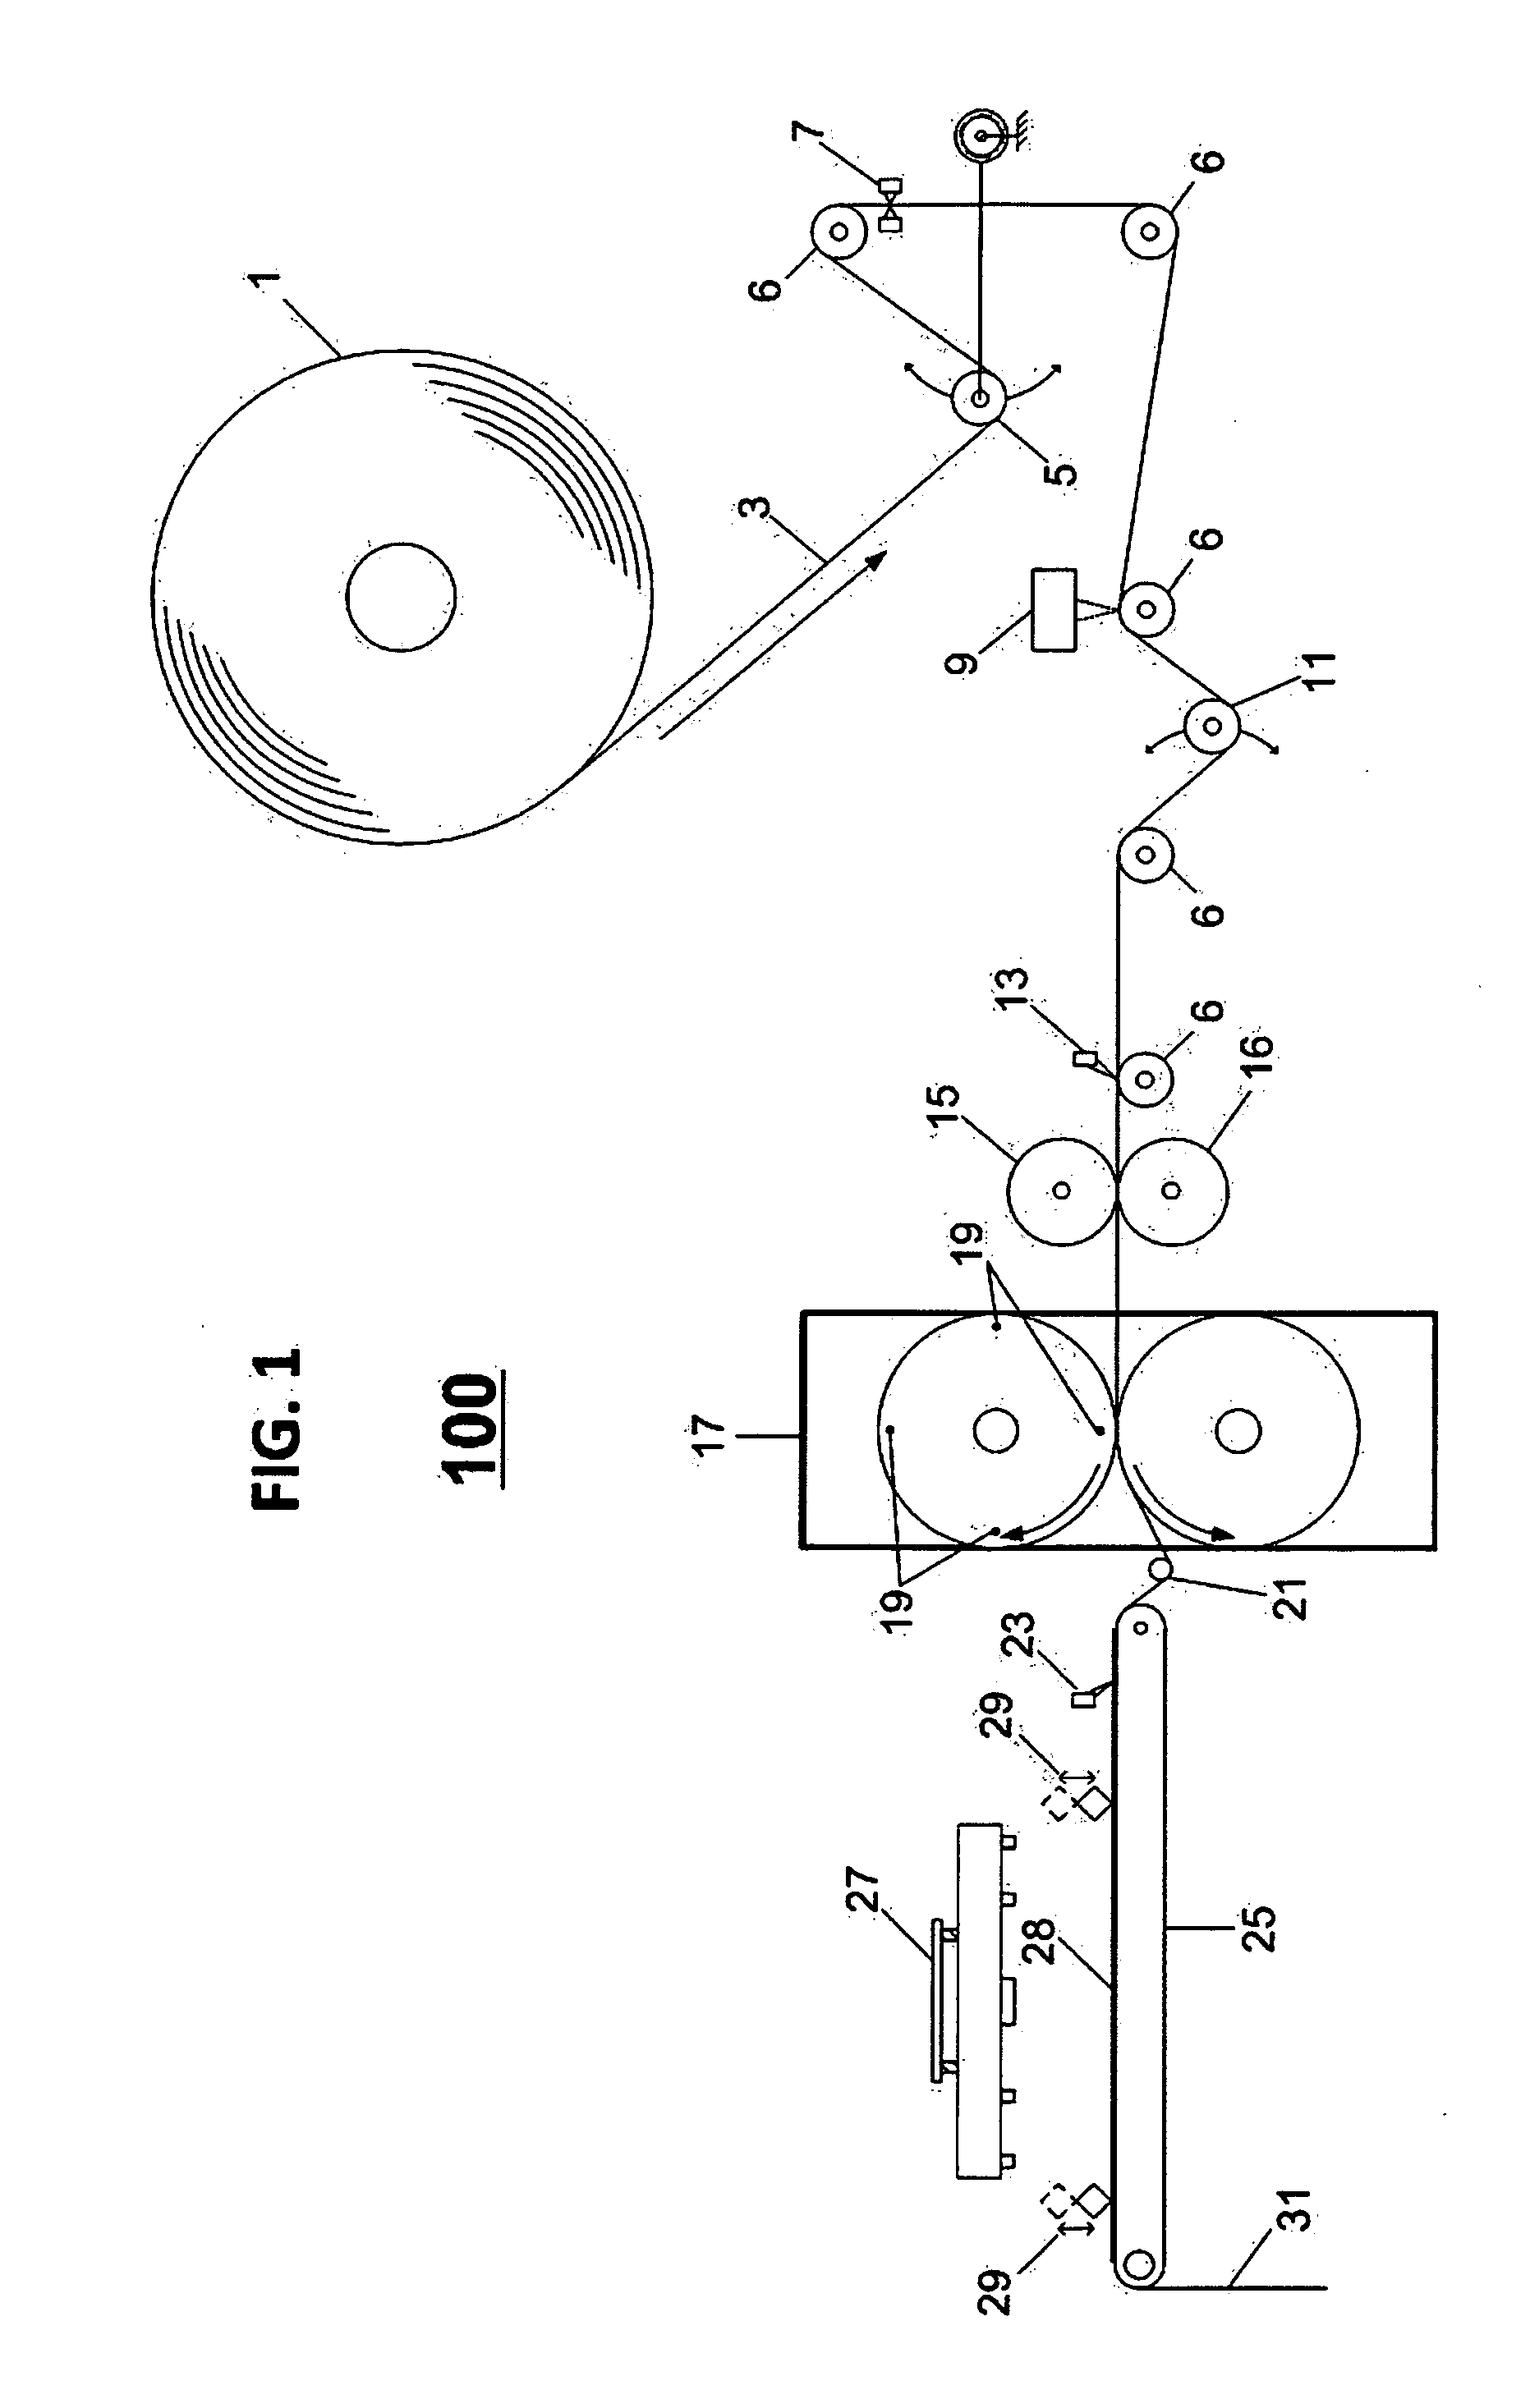 Apparatus and process for in-mold labeling